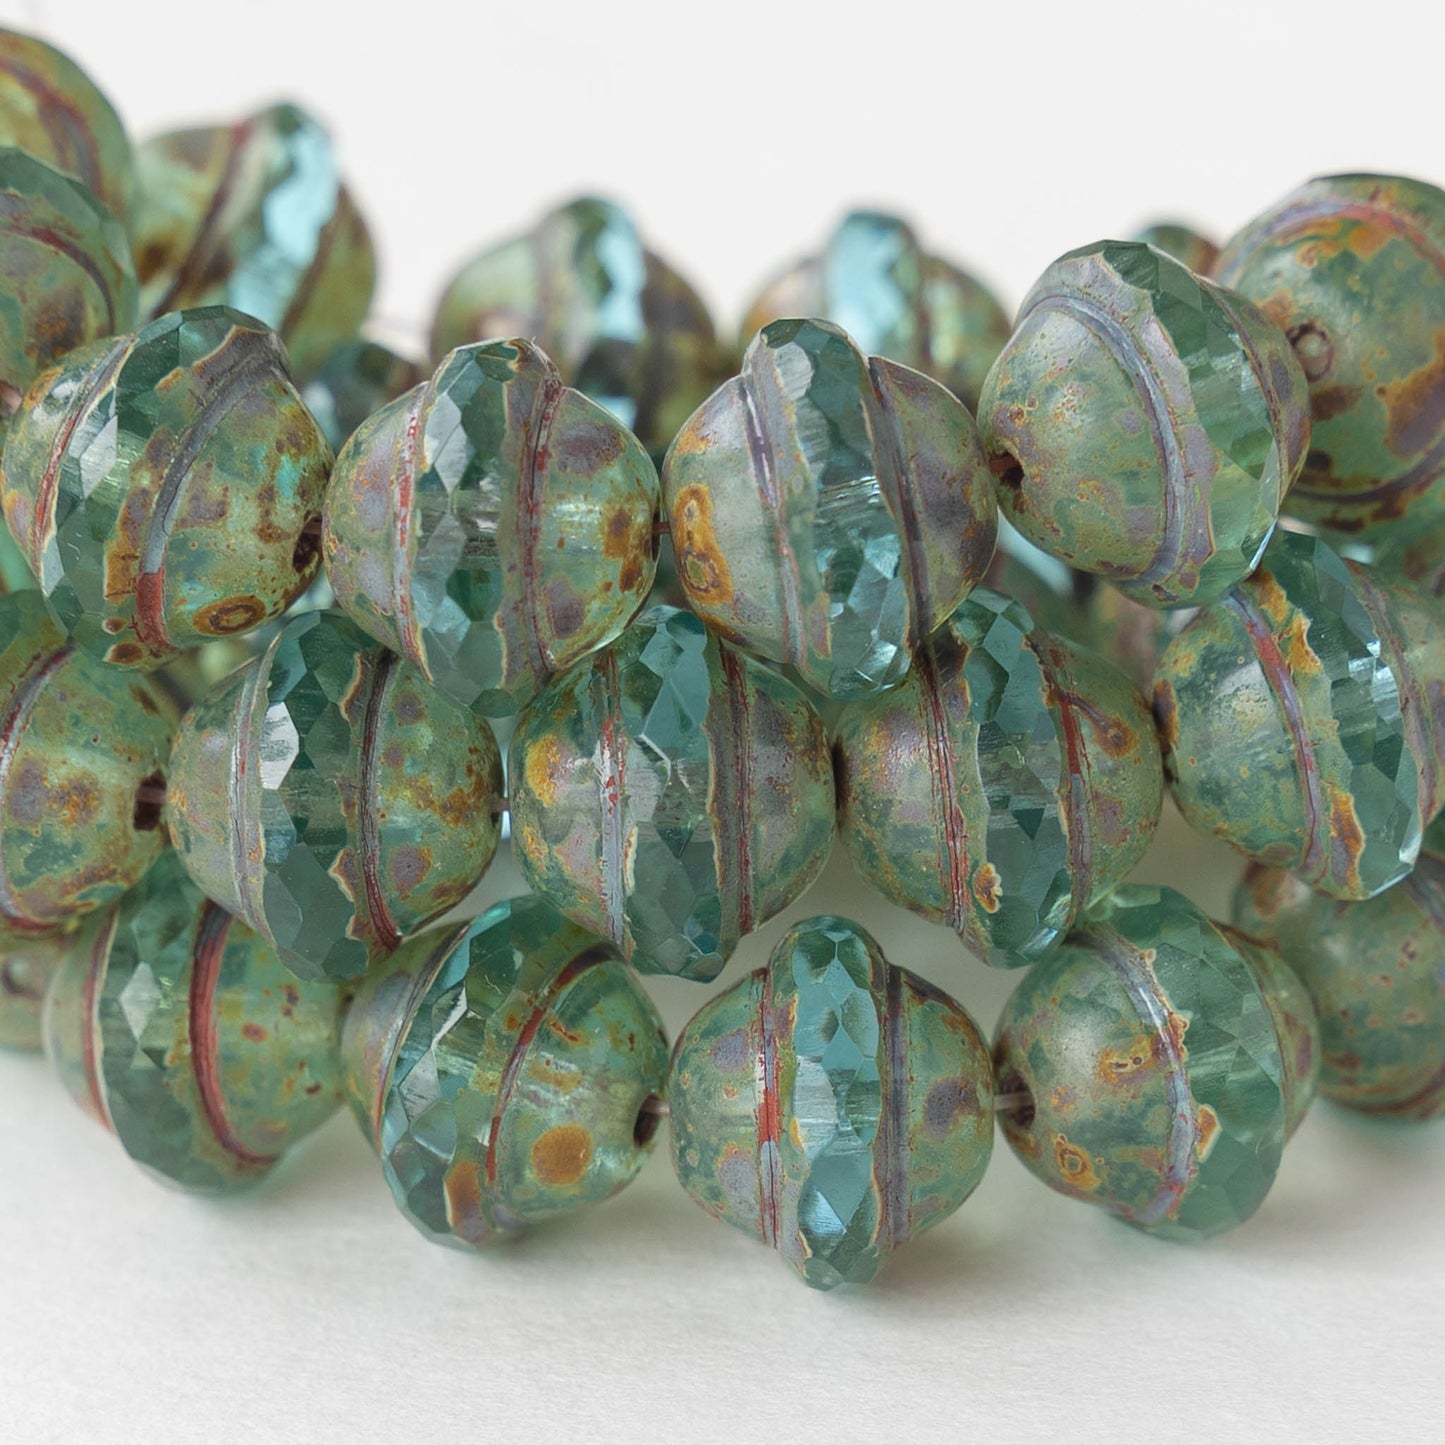 8x10mm Saturn Beads - Light Aqua with Picasso Finish - 15 Beads